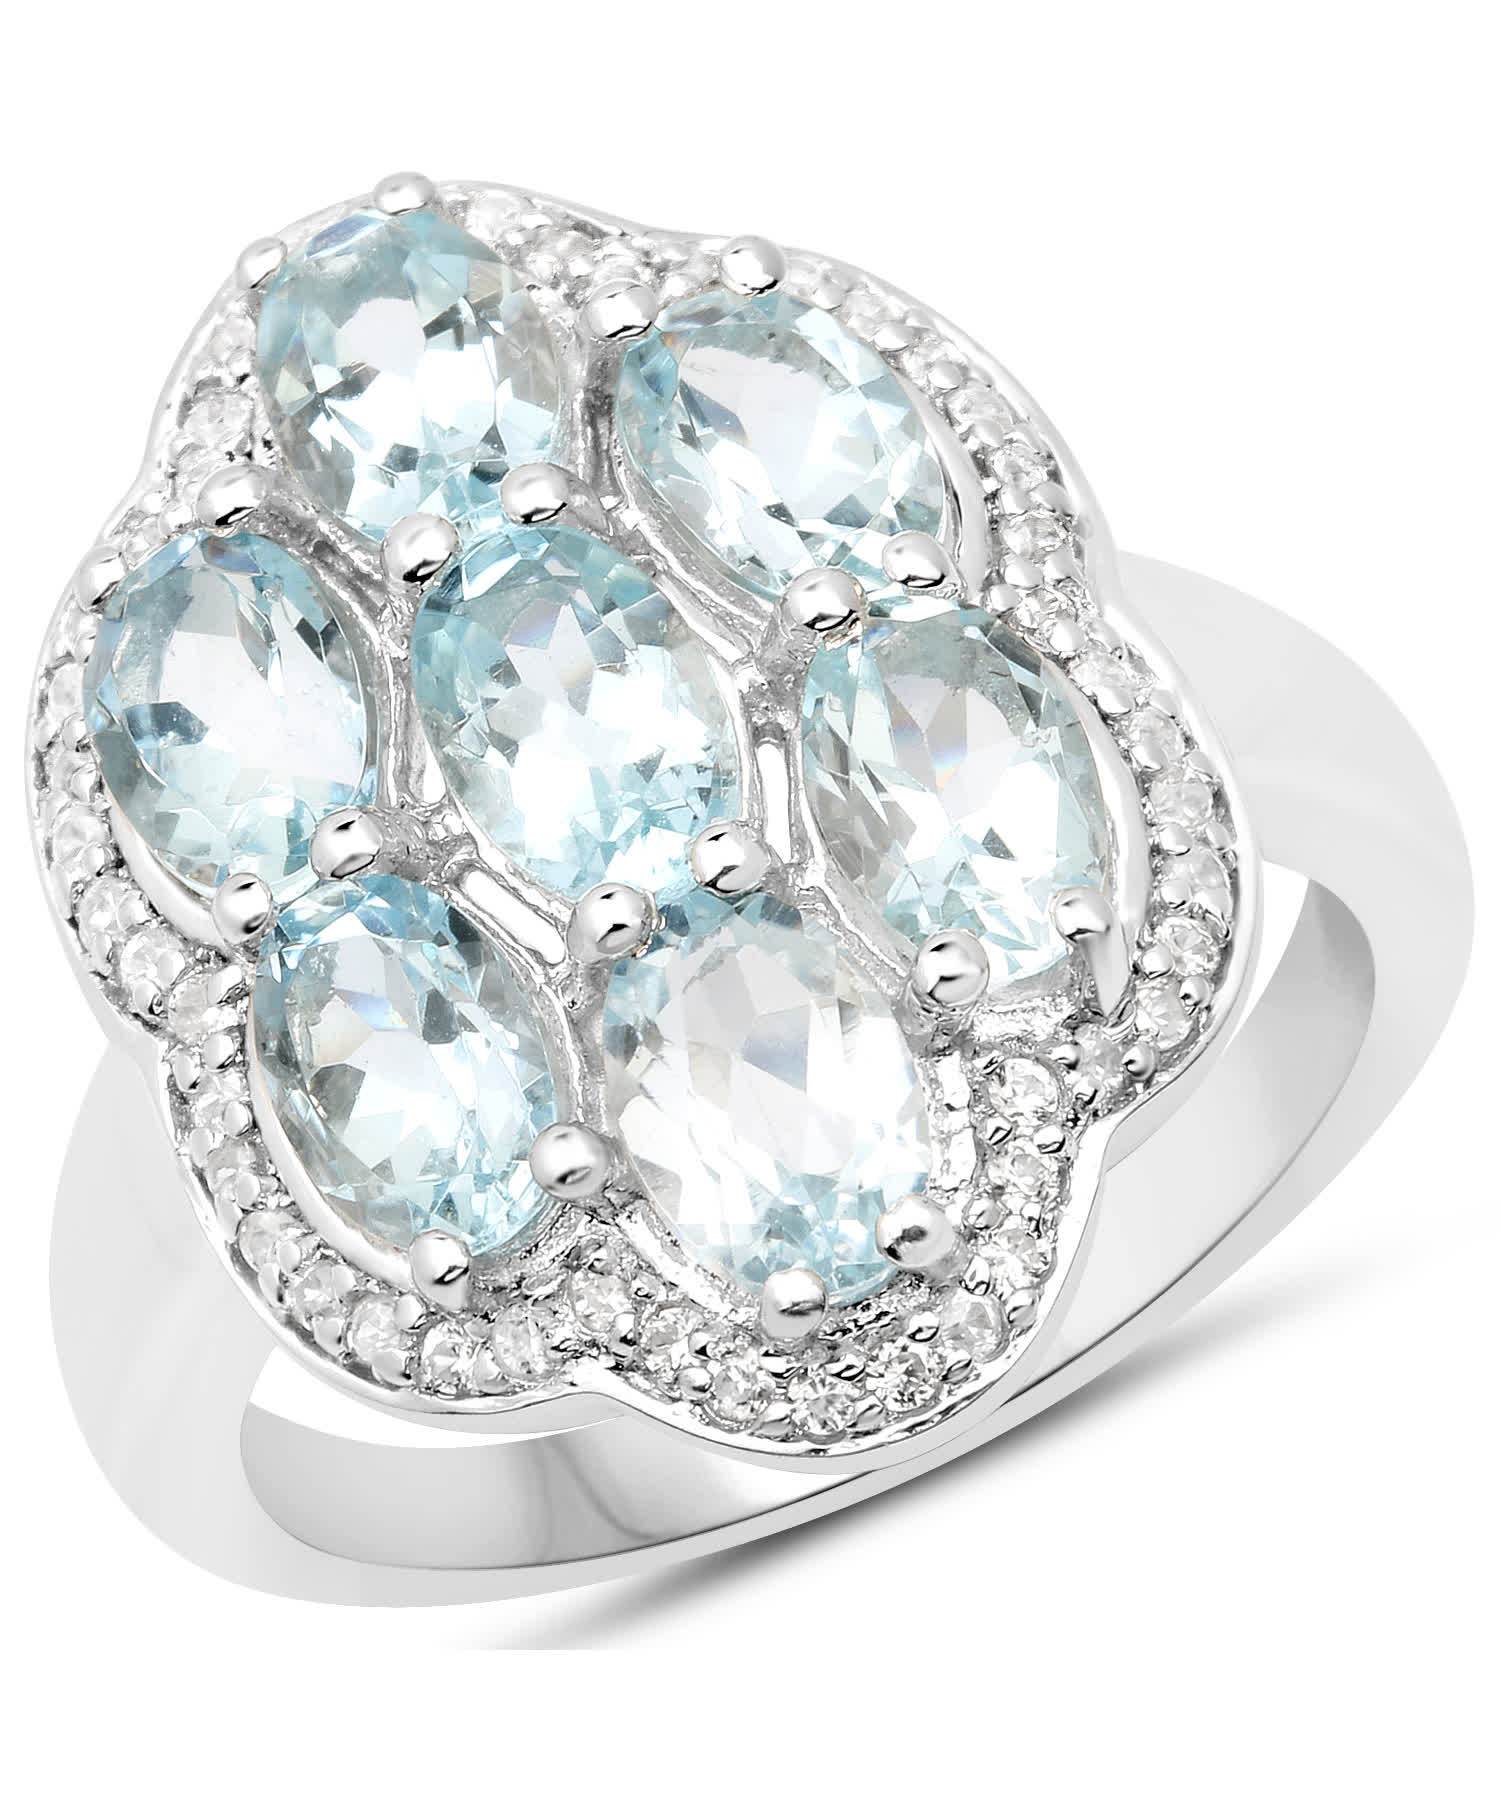 3.09ctw Natural Icy Sky Blue Aquamarine and Zircon Rhodium Plated 925 Sterling Silver Cocktail Ring View 1